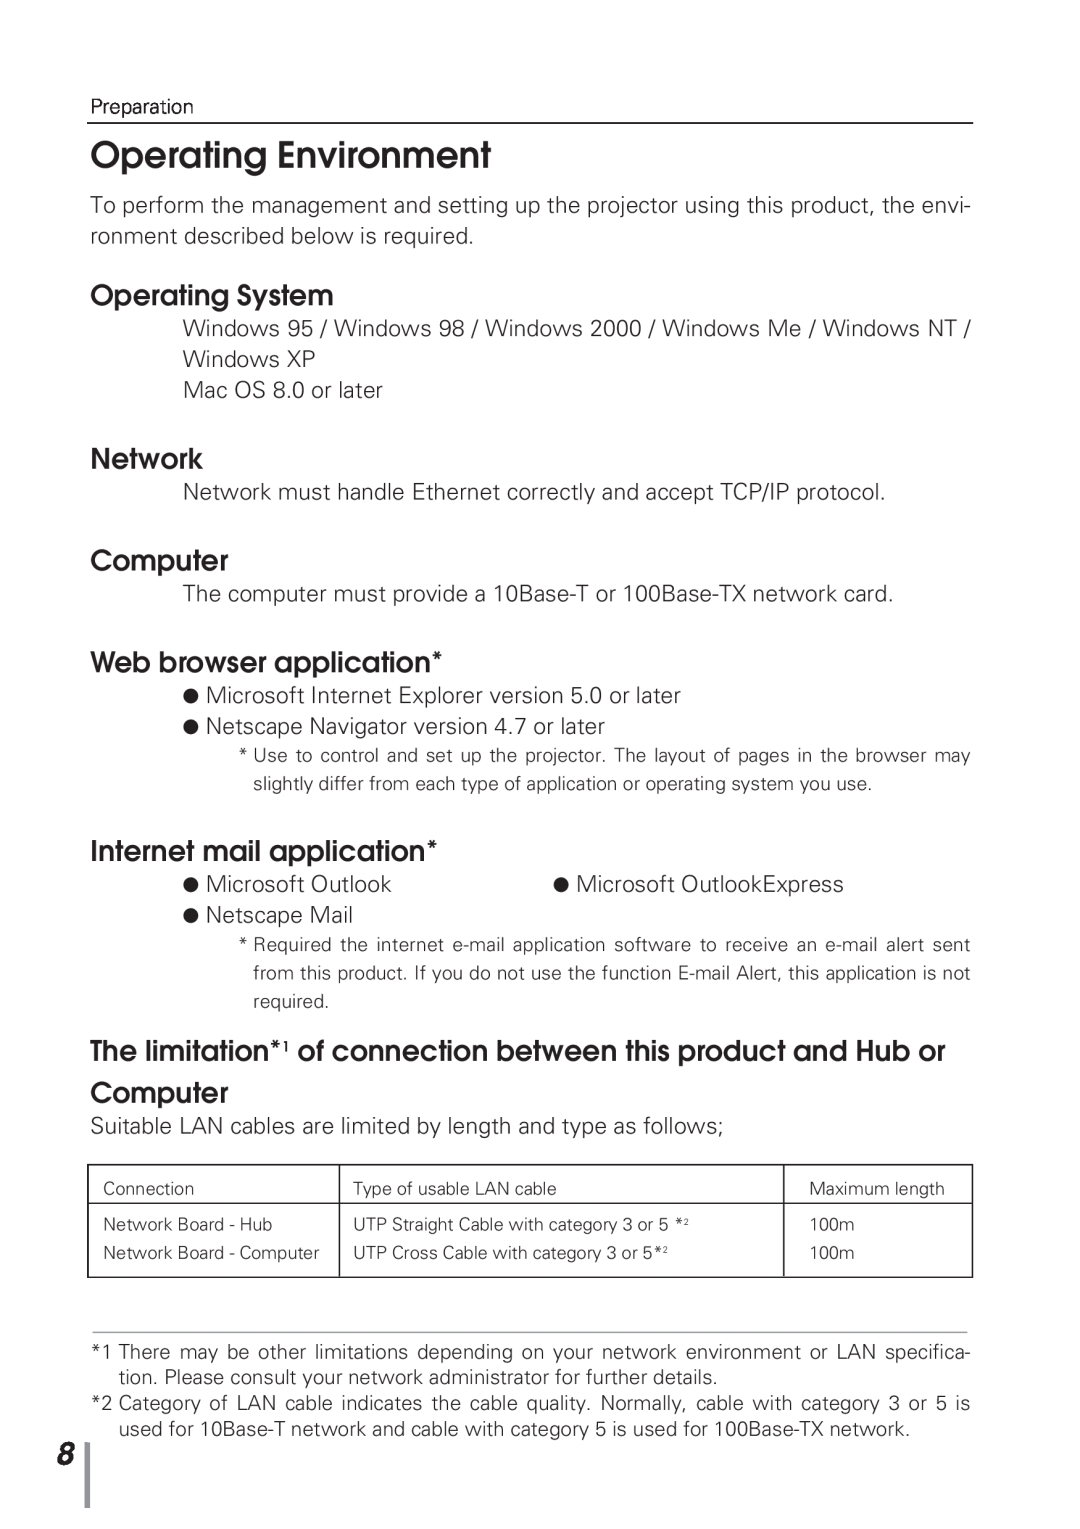 Eiki MD13NET owner manual Operating Environment, Operating System, Network, Computer, Web browser application 